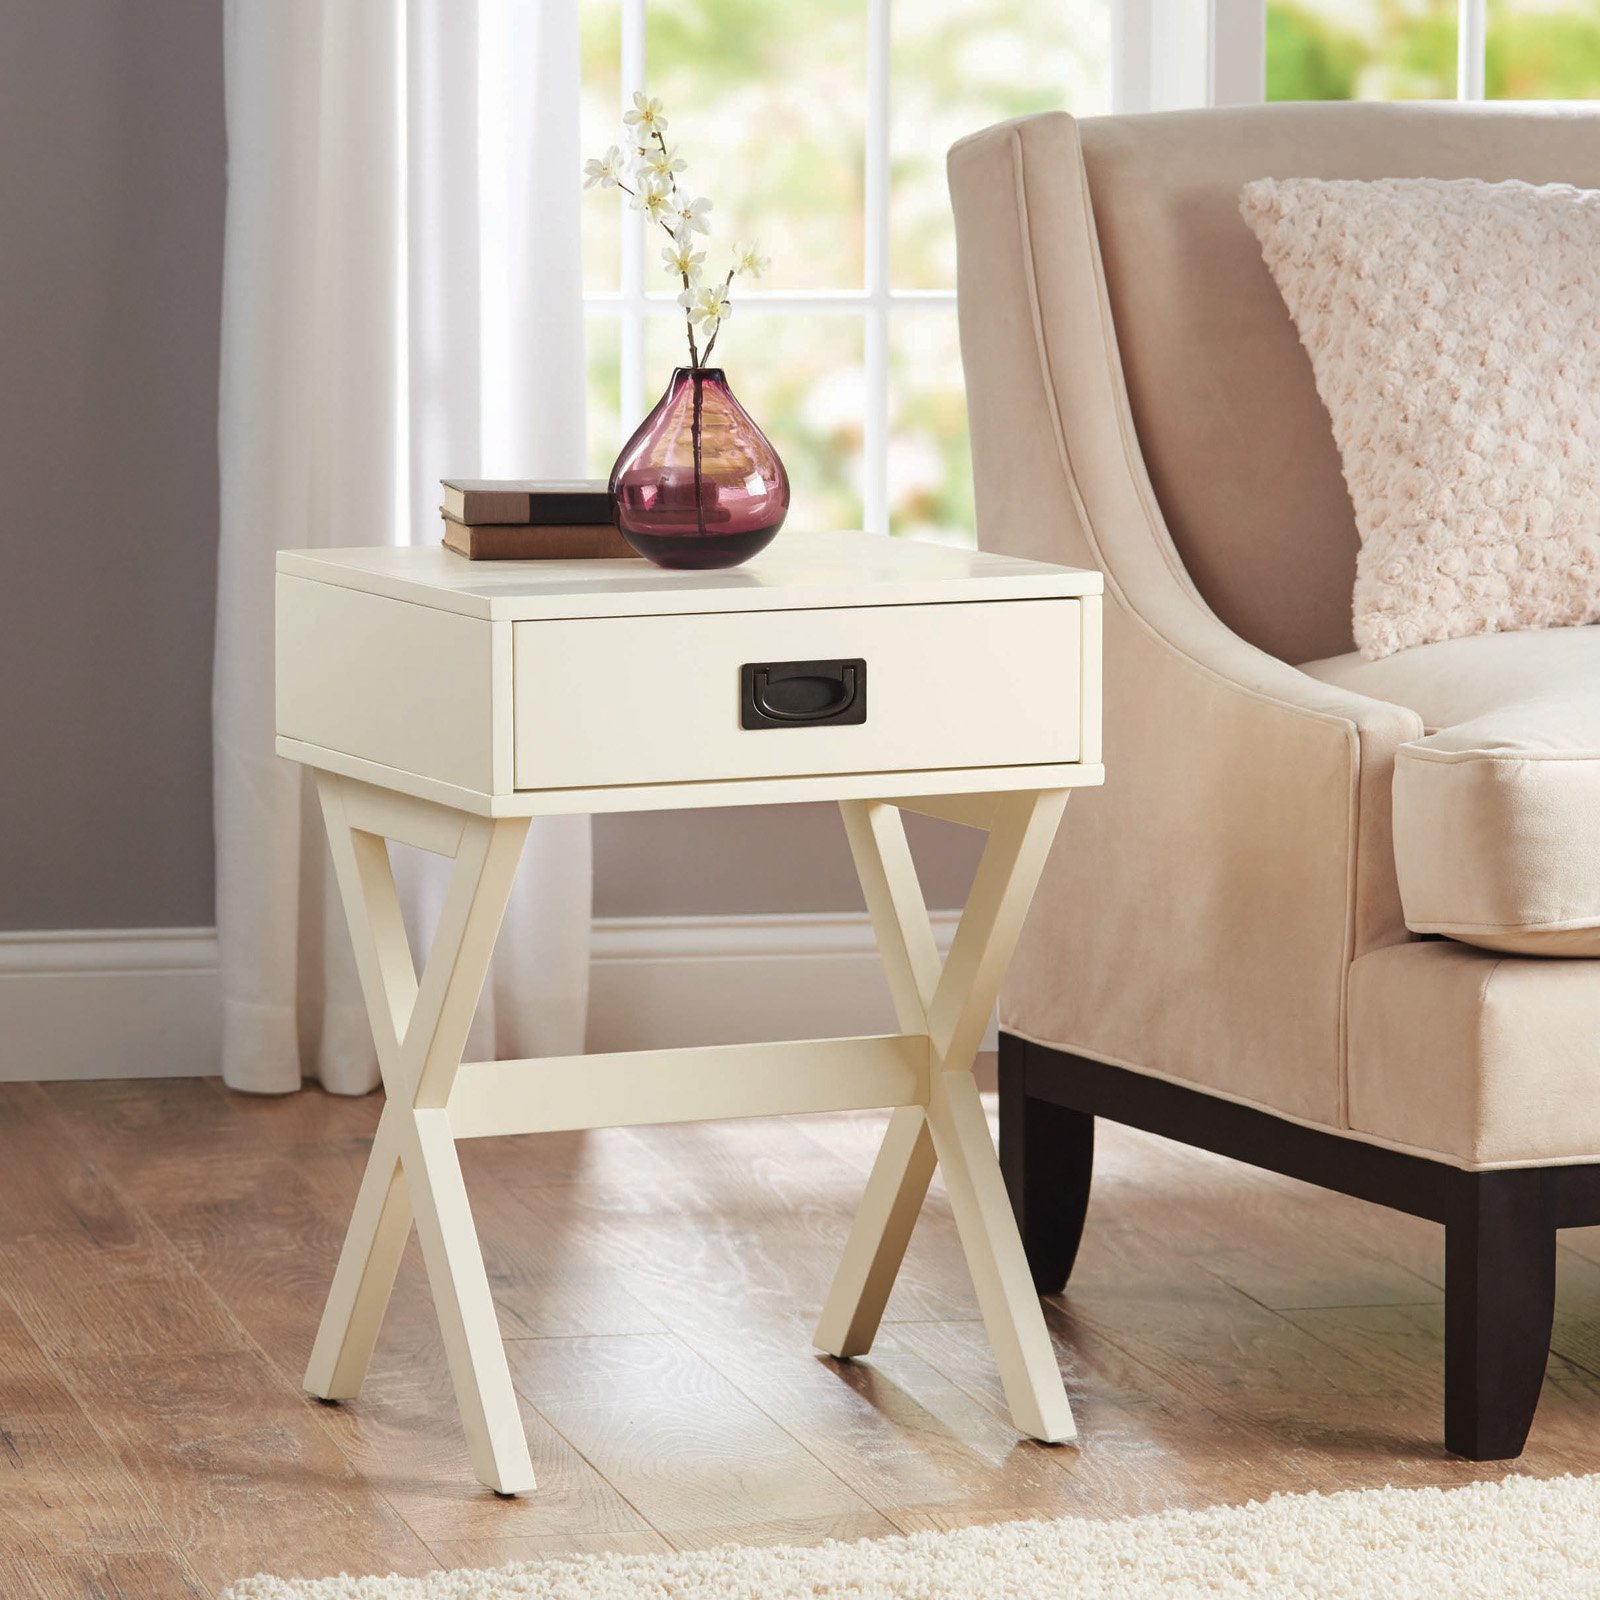 Better Homes & Gardens X-Leg Accent Table with Drawer, Multiple Colors - image 3 of 6